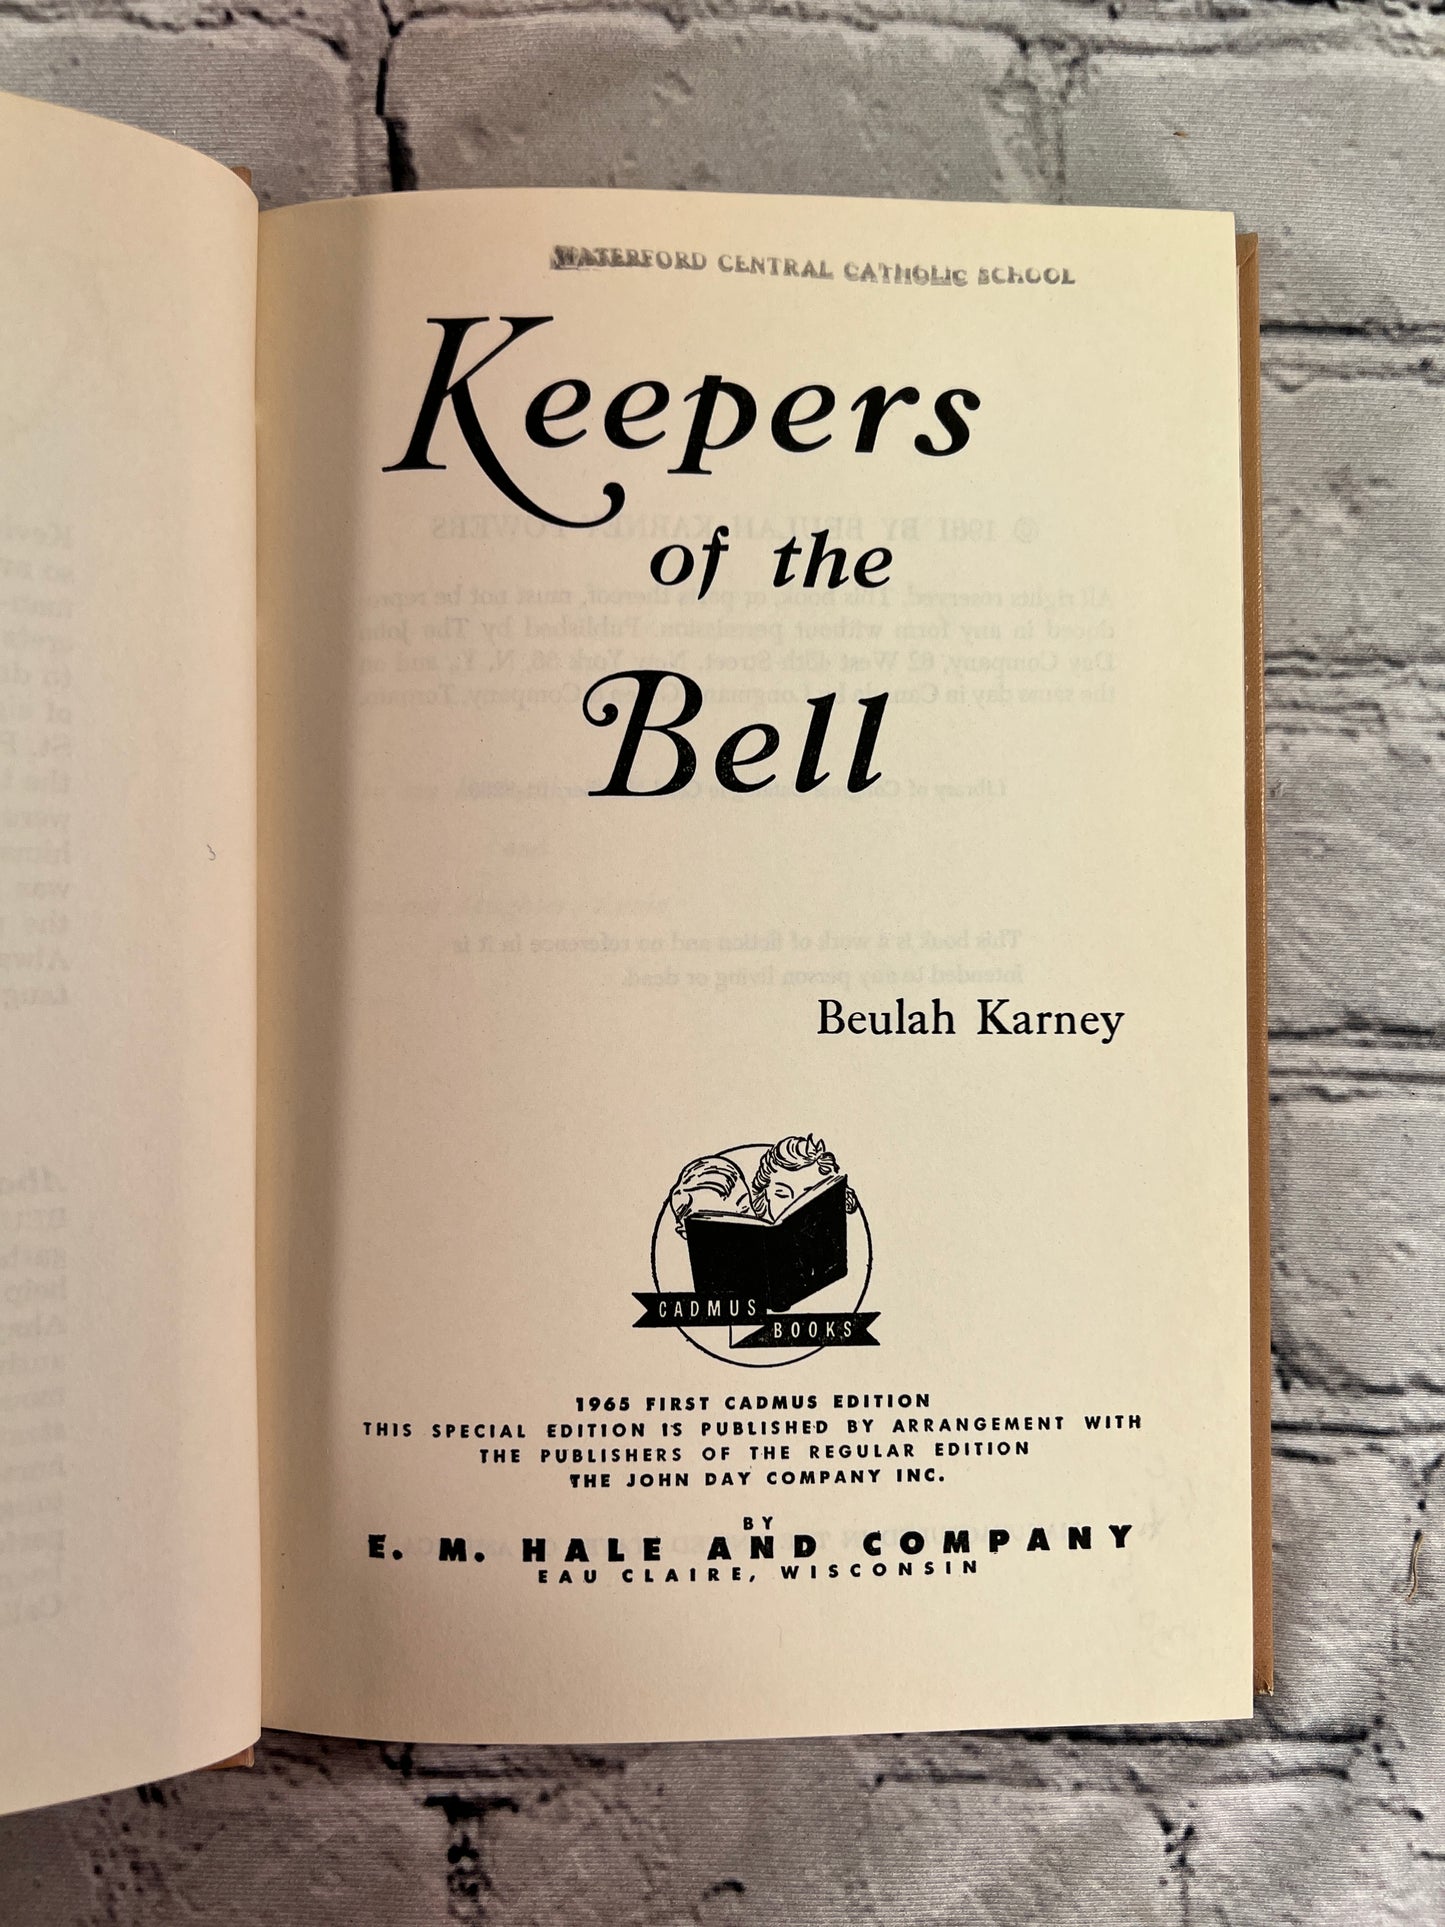 Keepers of the Bell by Beulah Karney [1965 · 1st Cadmus Edition]